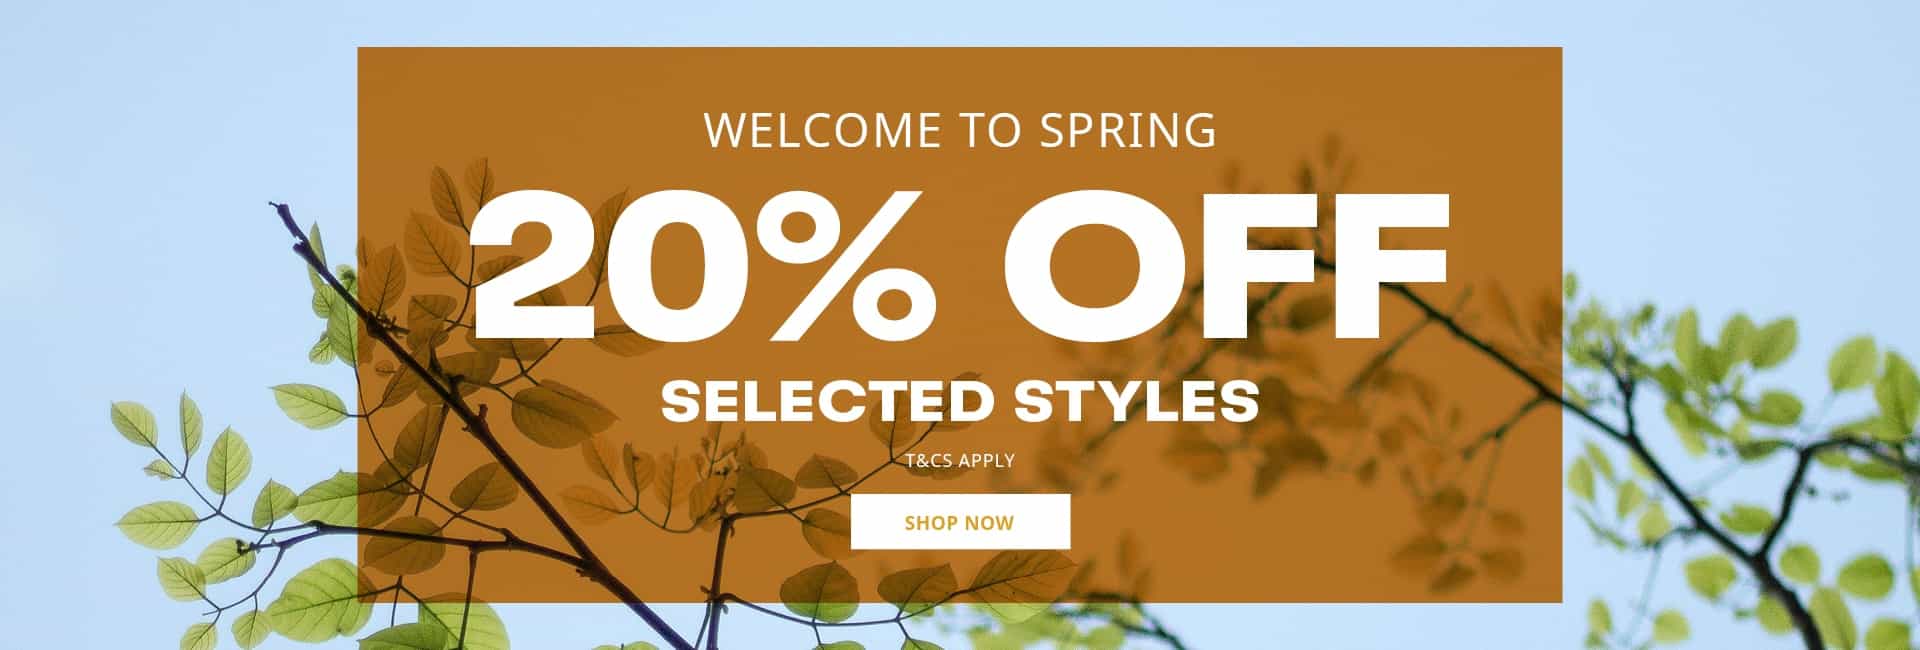 Timberland 20% Off Selected Styles